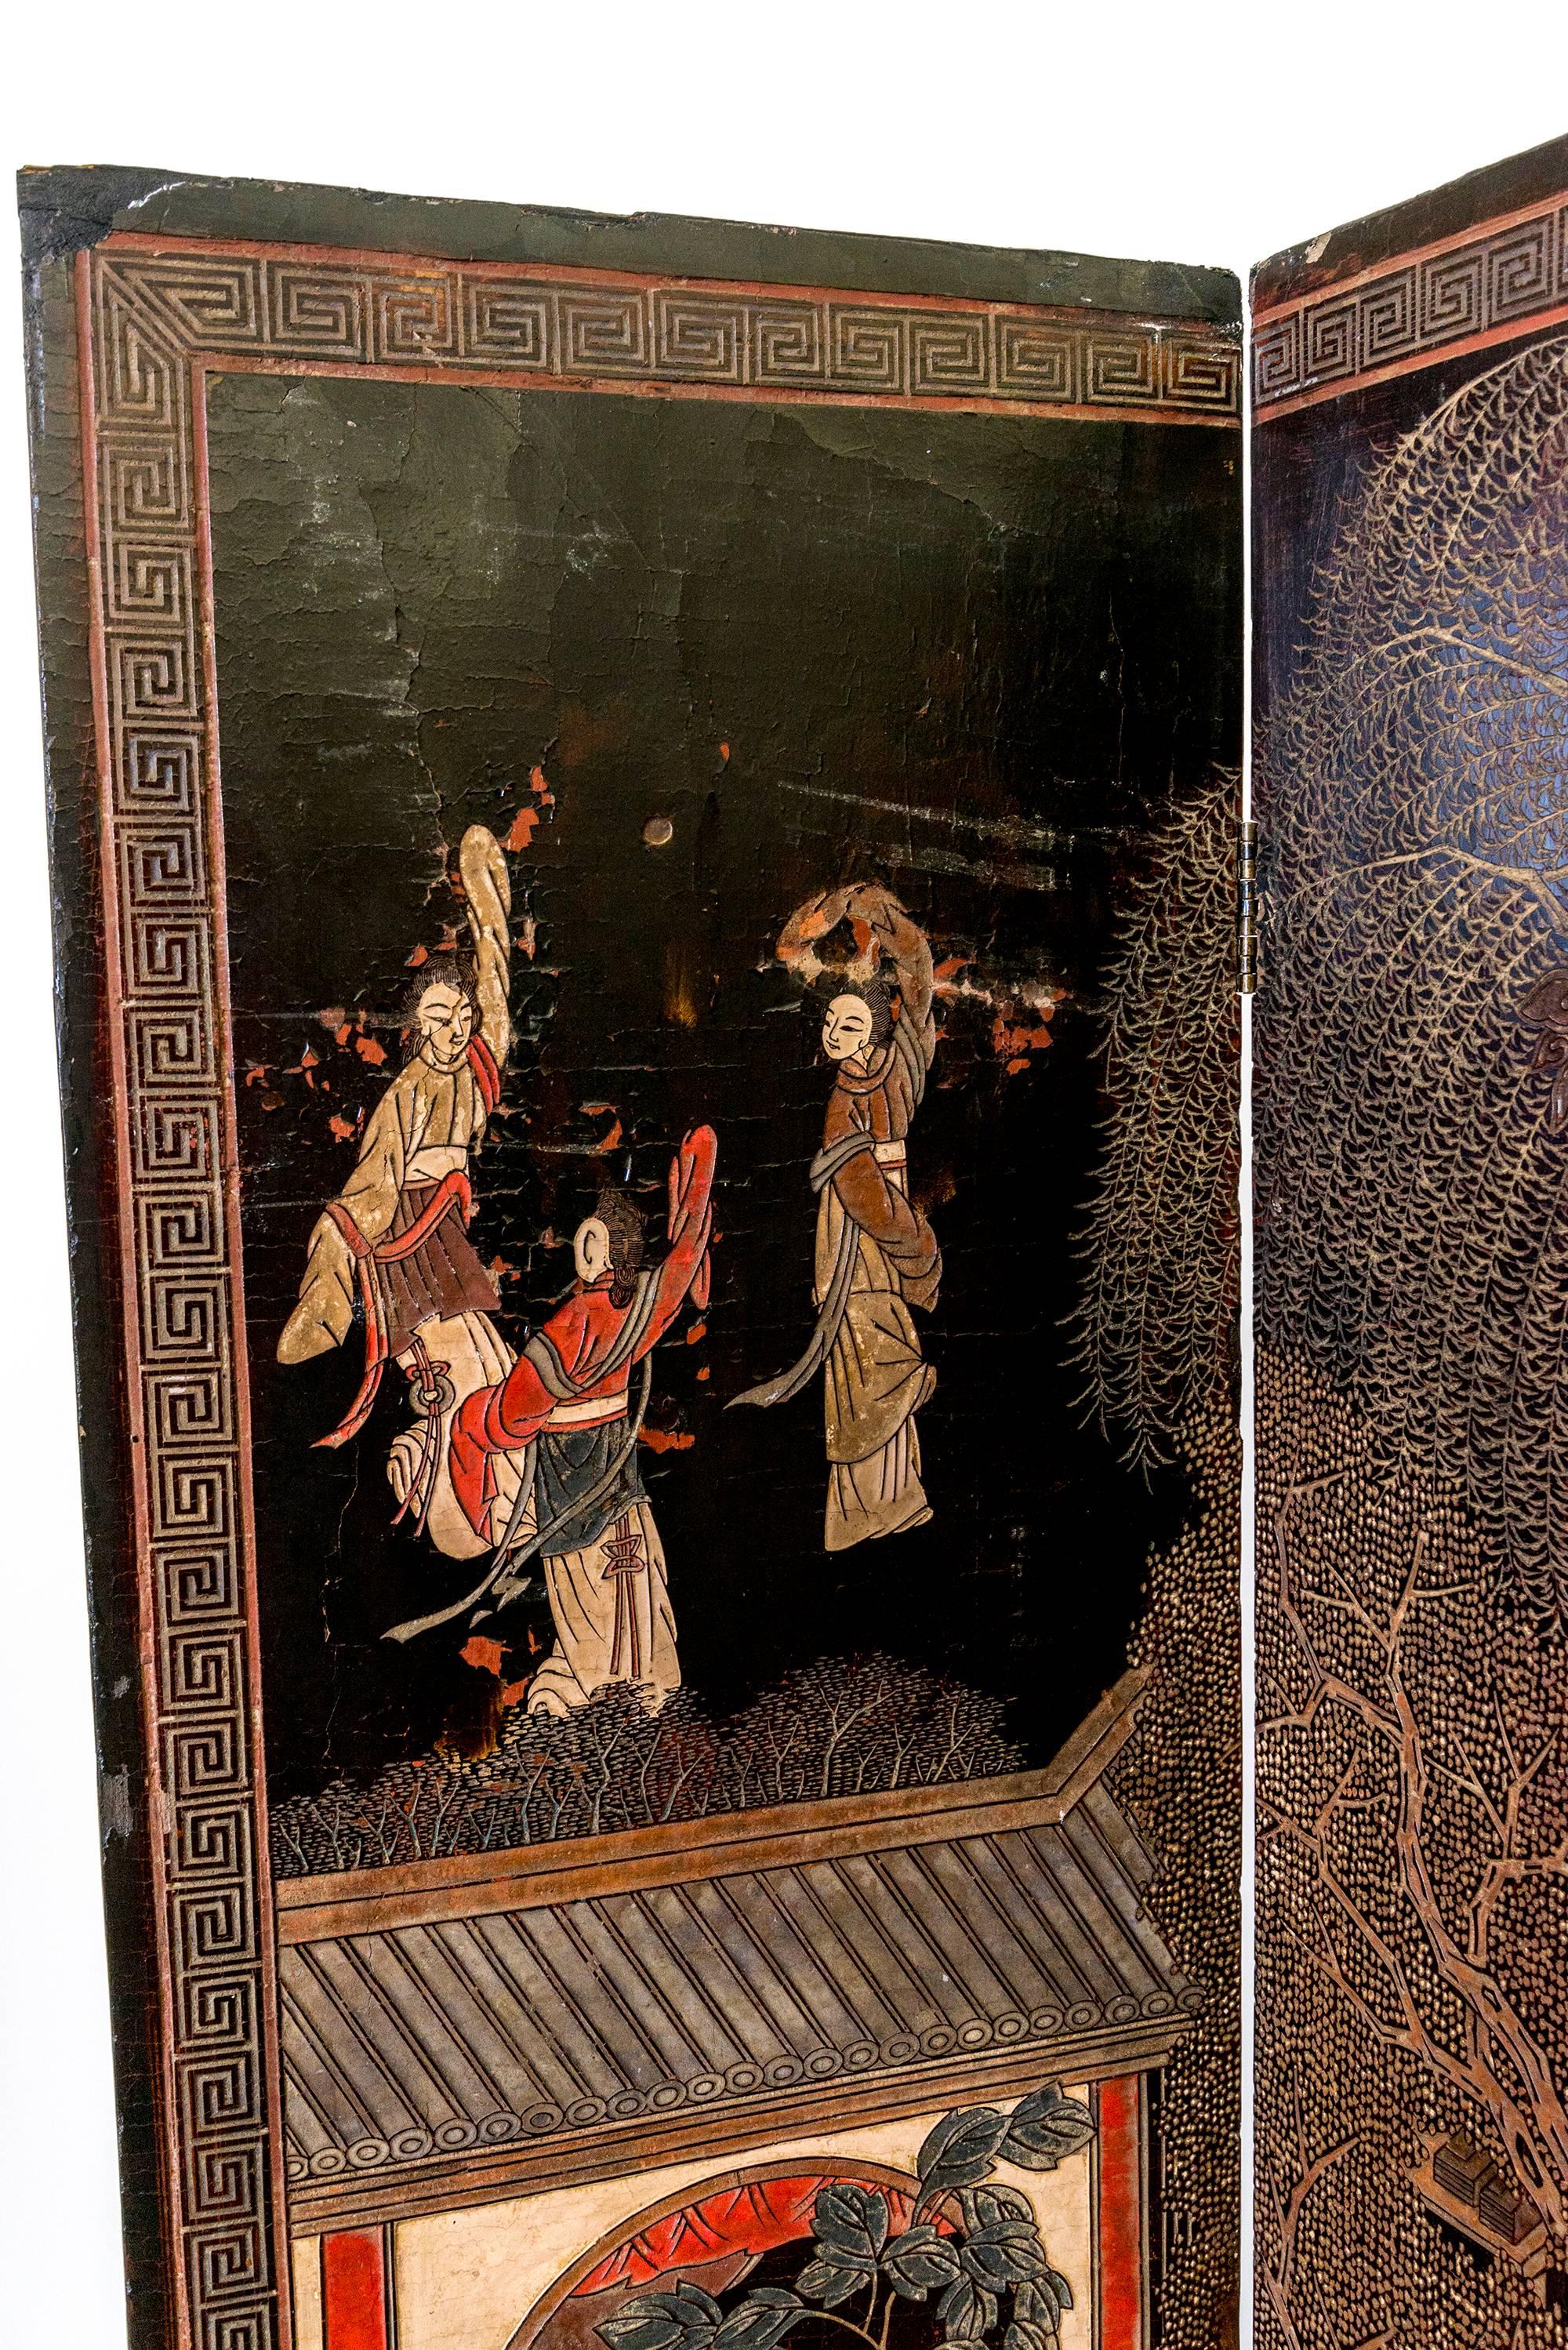 Wood Coromandel Screen with Carved Asian Paintings and Written Characters